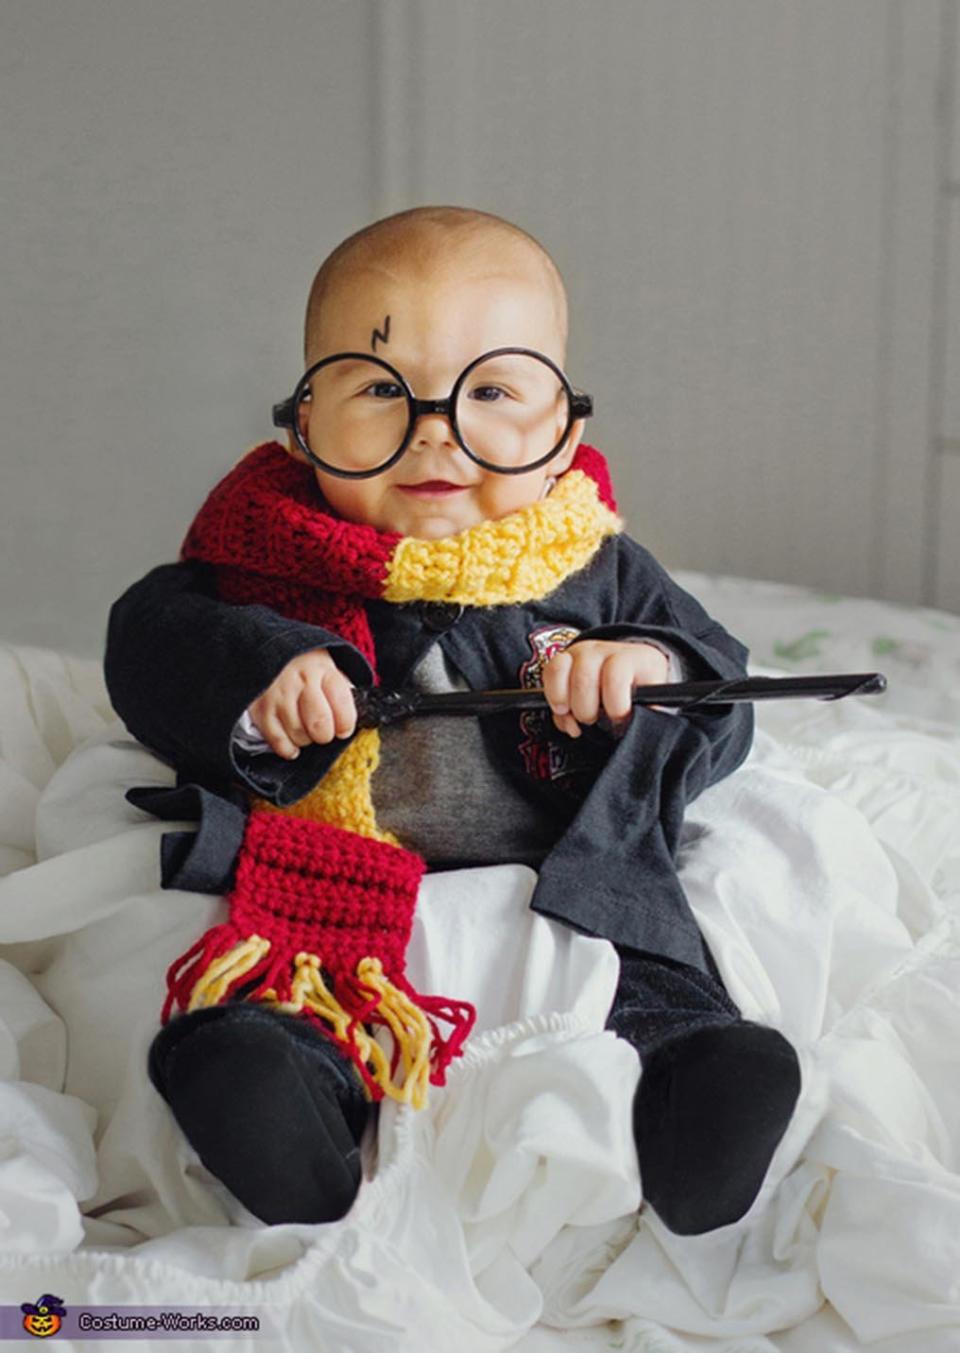 Via <a href="http://www.costume-works.com/costumes_for_babies/harry-potter-baby2.html" target="_blank">Costume Works</a>